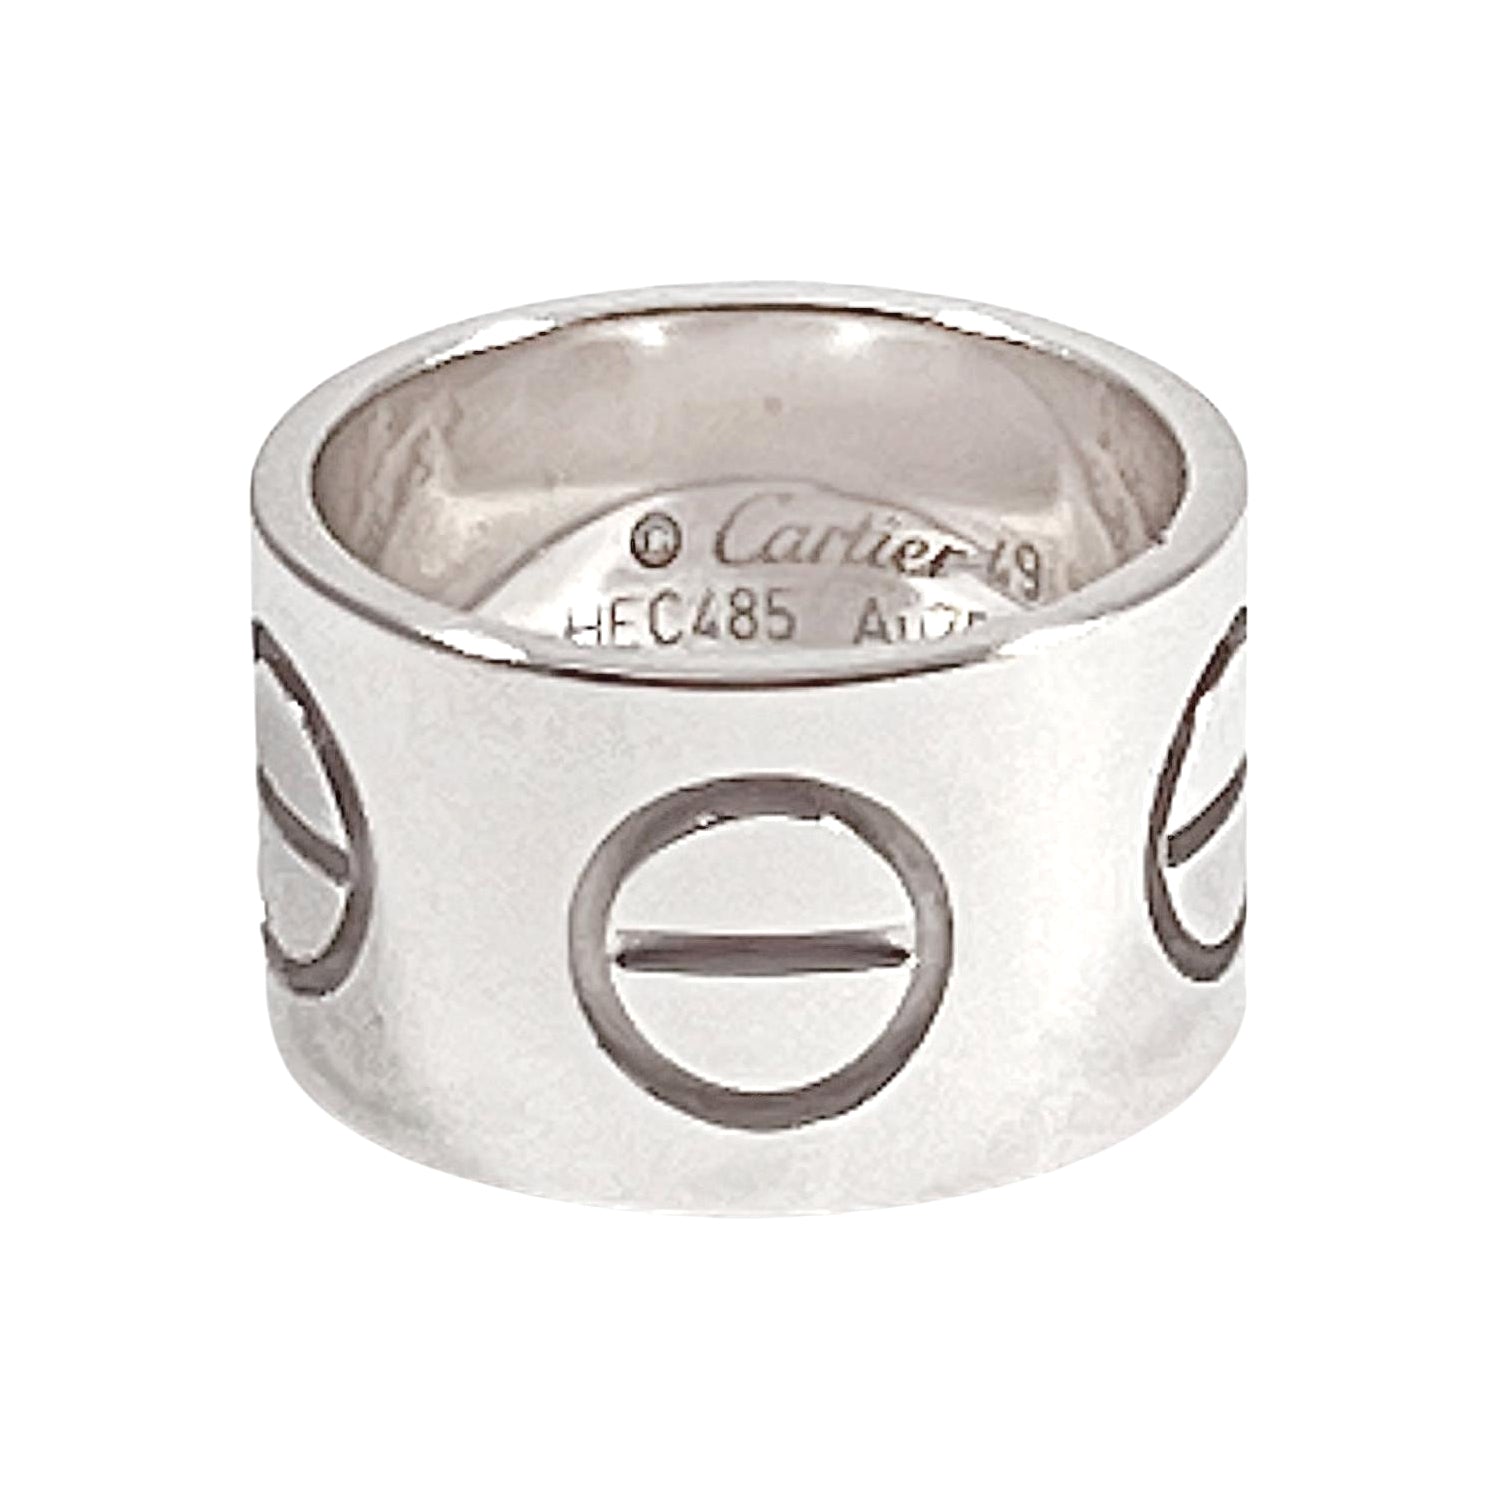 Cartier - 18k White Gold Wide LOVE Band Ring